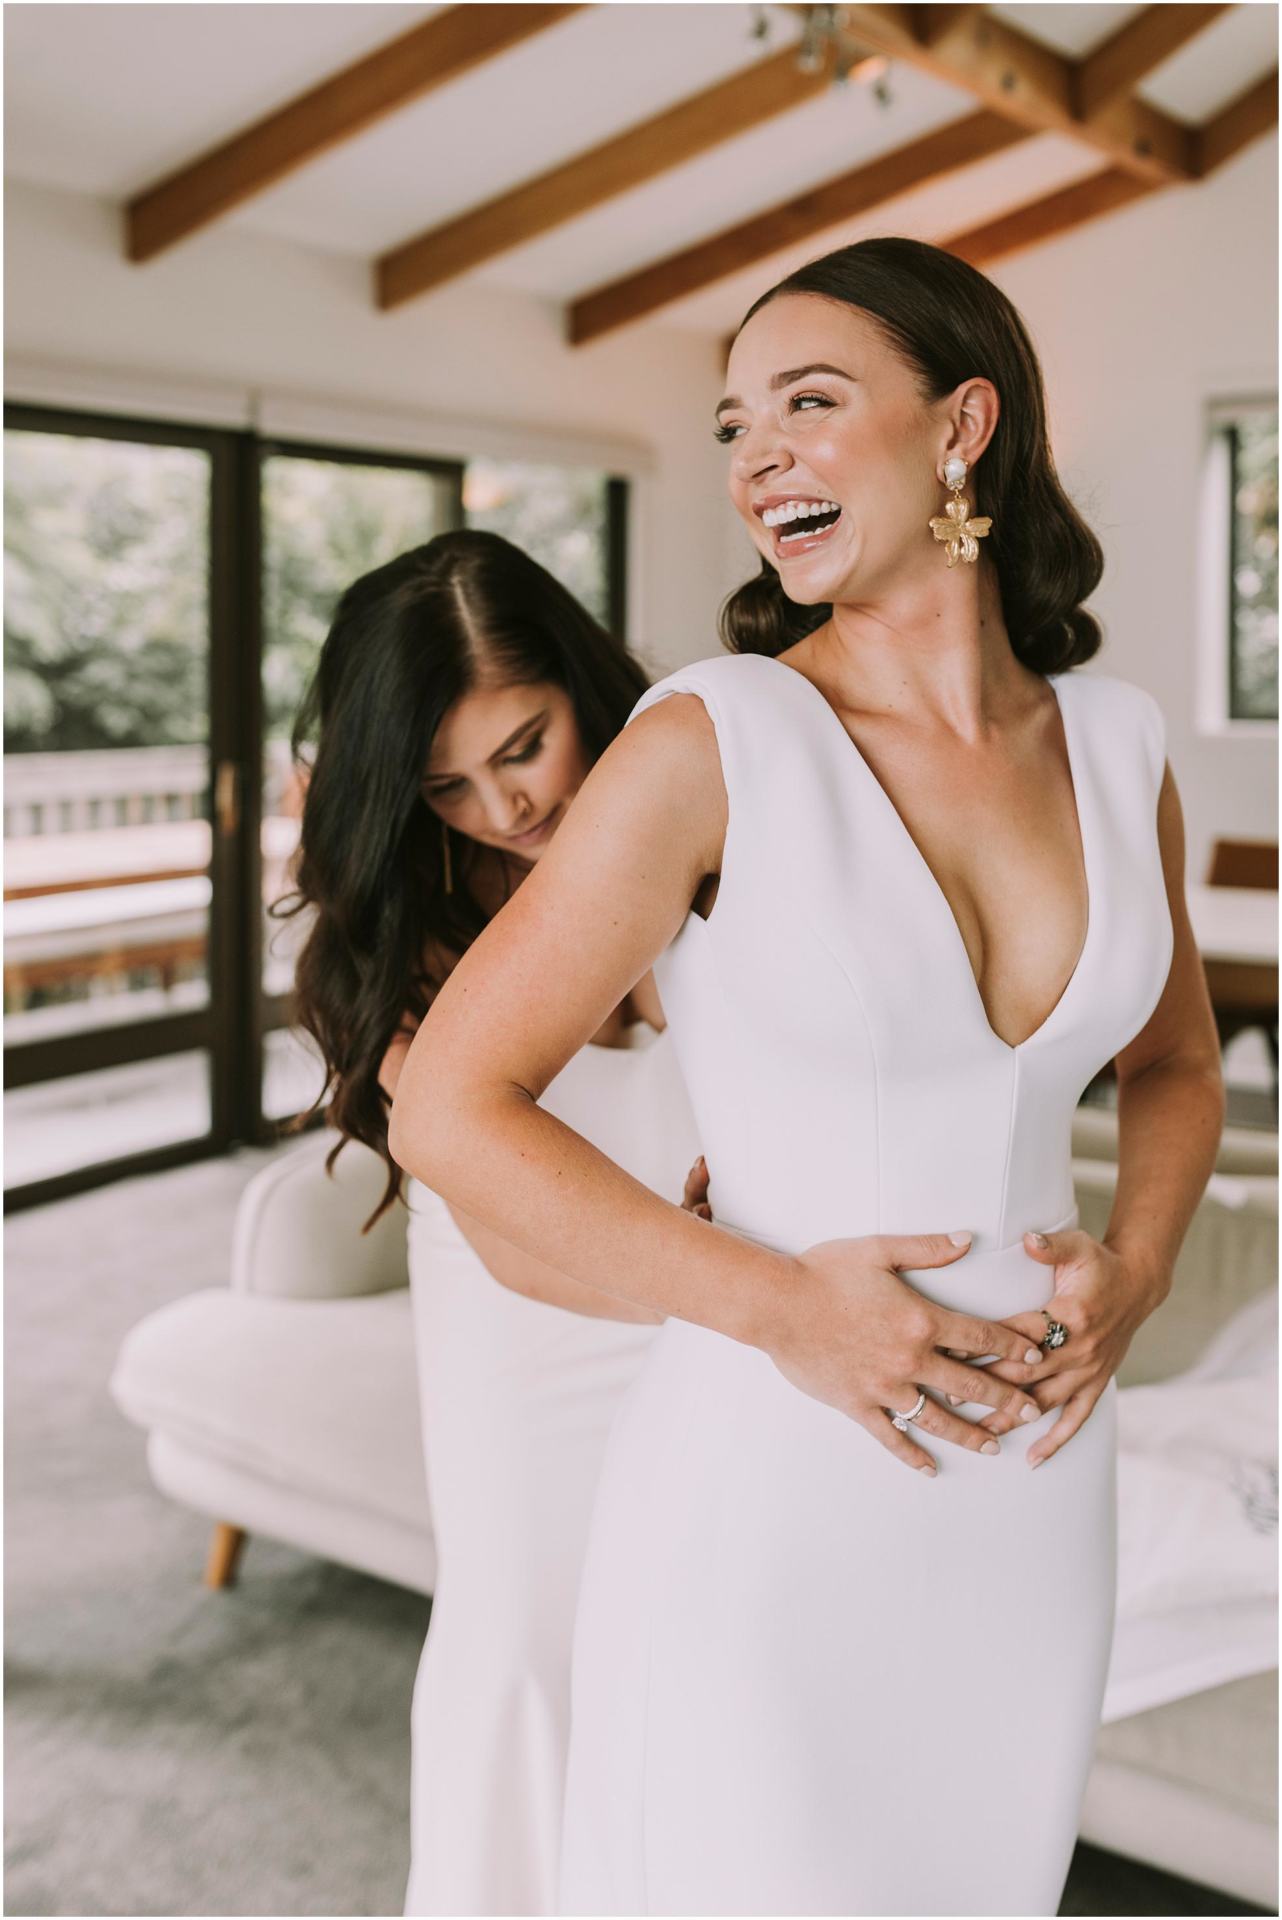 Charlotte Kiri Photography - Wedding Photography of a bride laughing as her bridesmaid helps button up her sleek low V-neck dress, before the wedding in their hotel room in Wanaka, New Zealand.